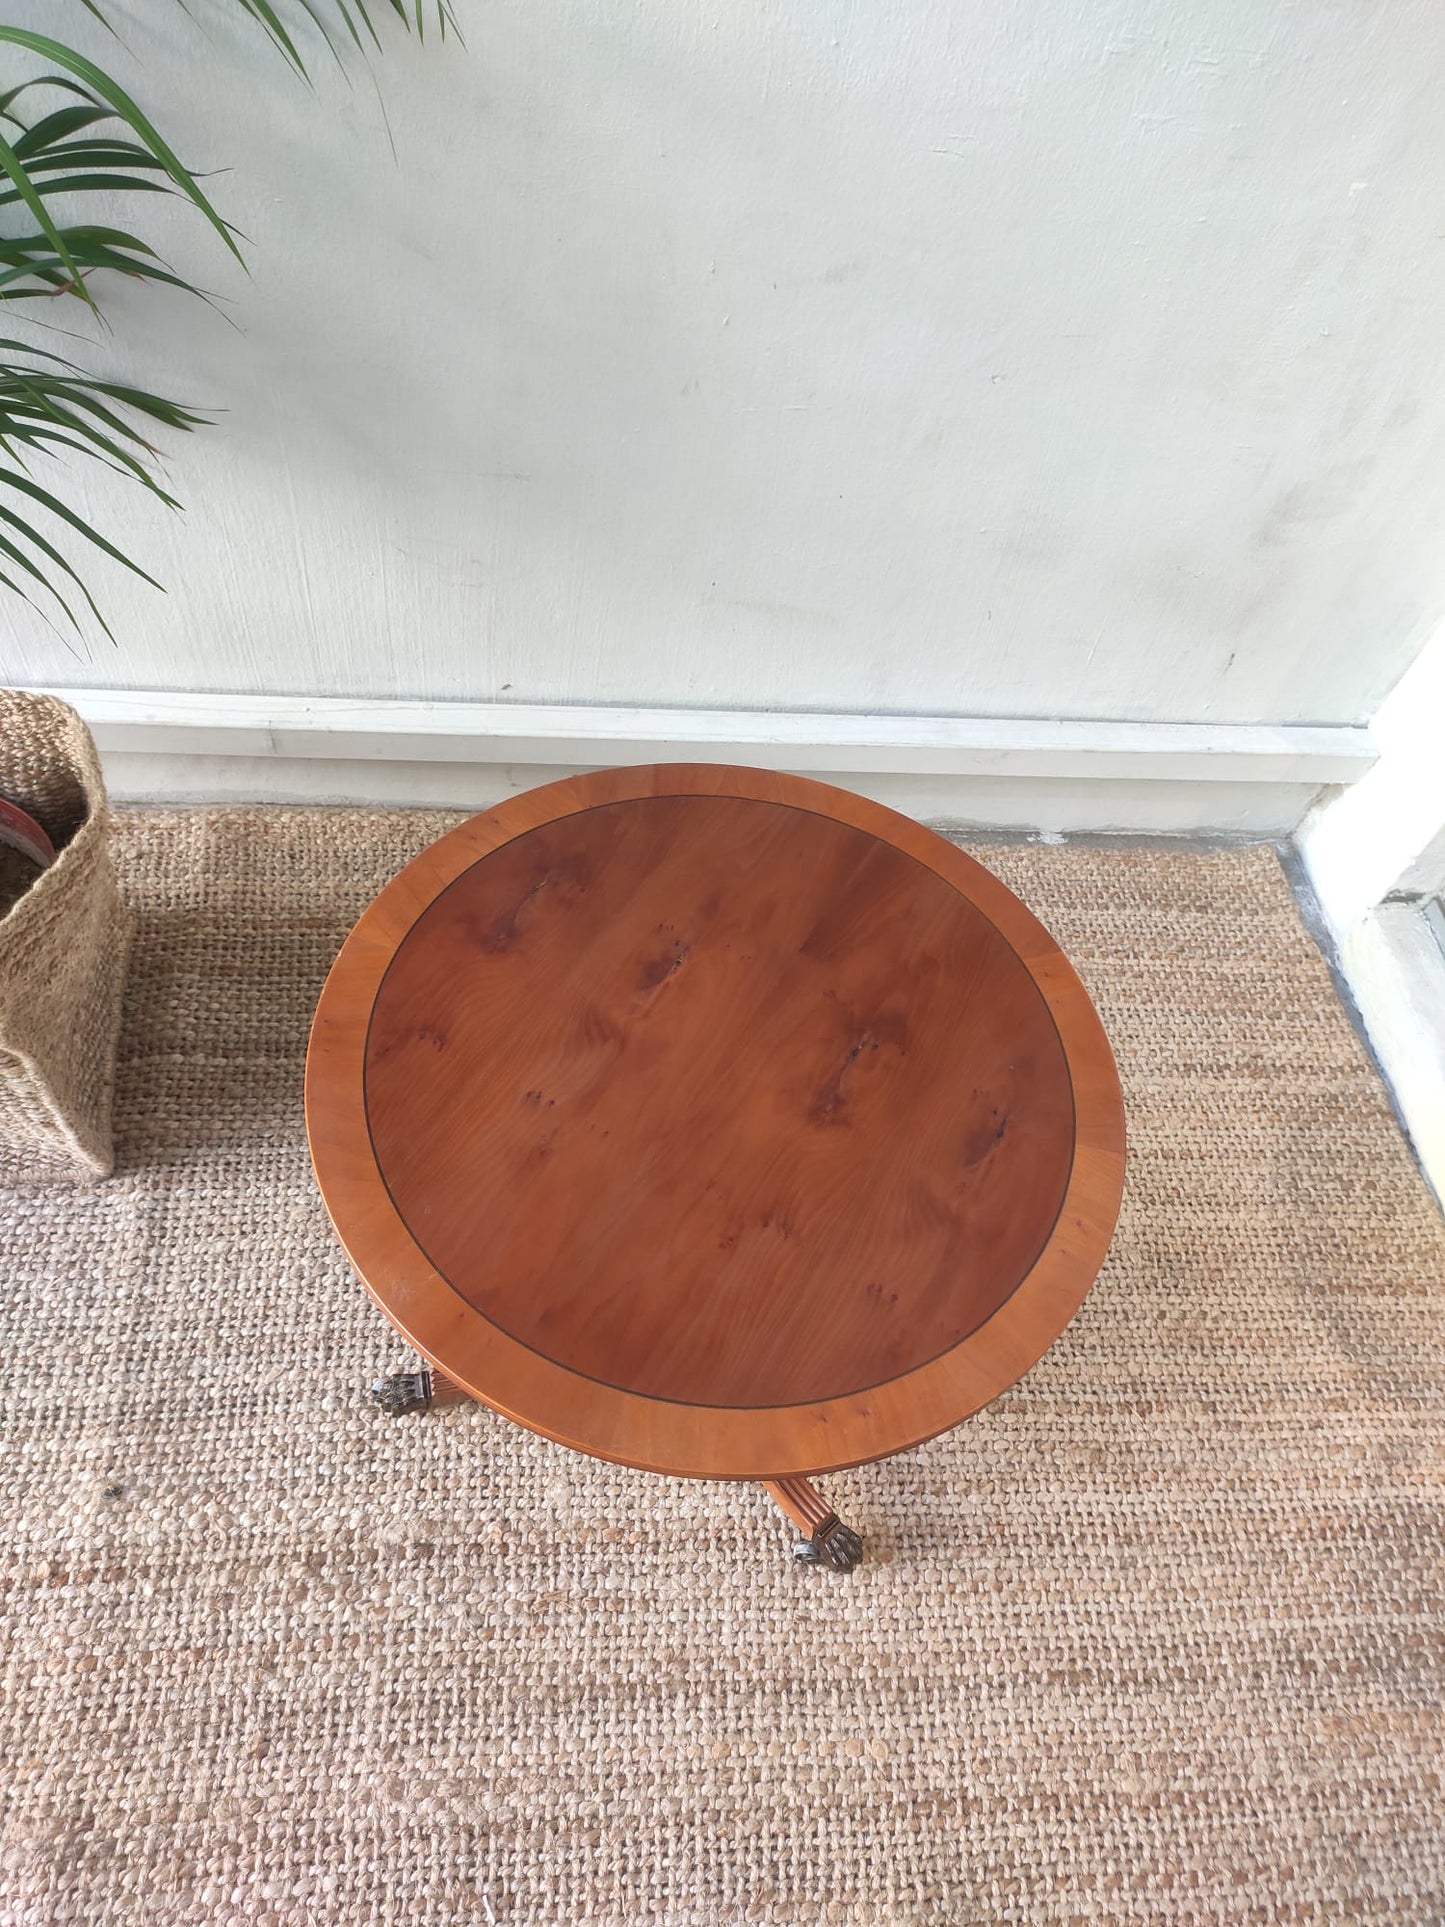 Satin wood table with tripod